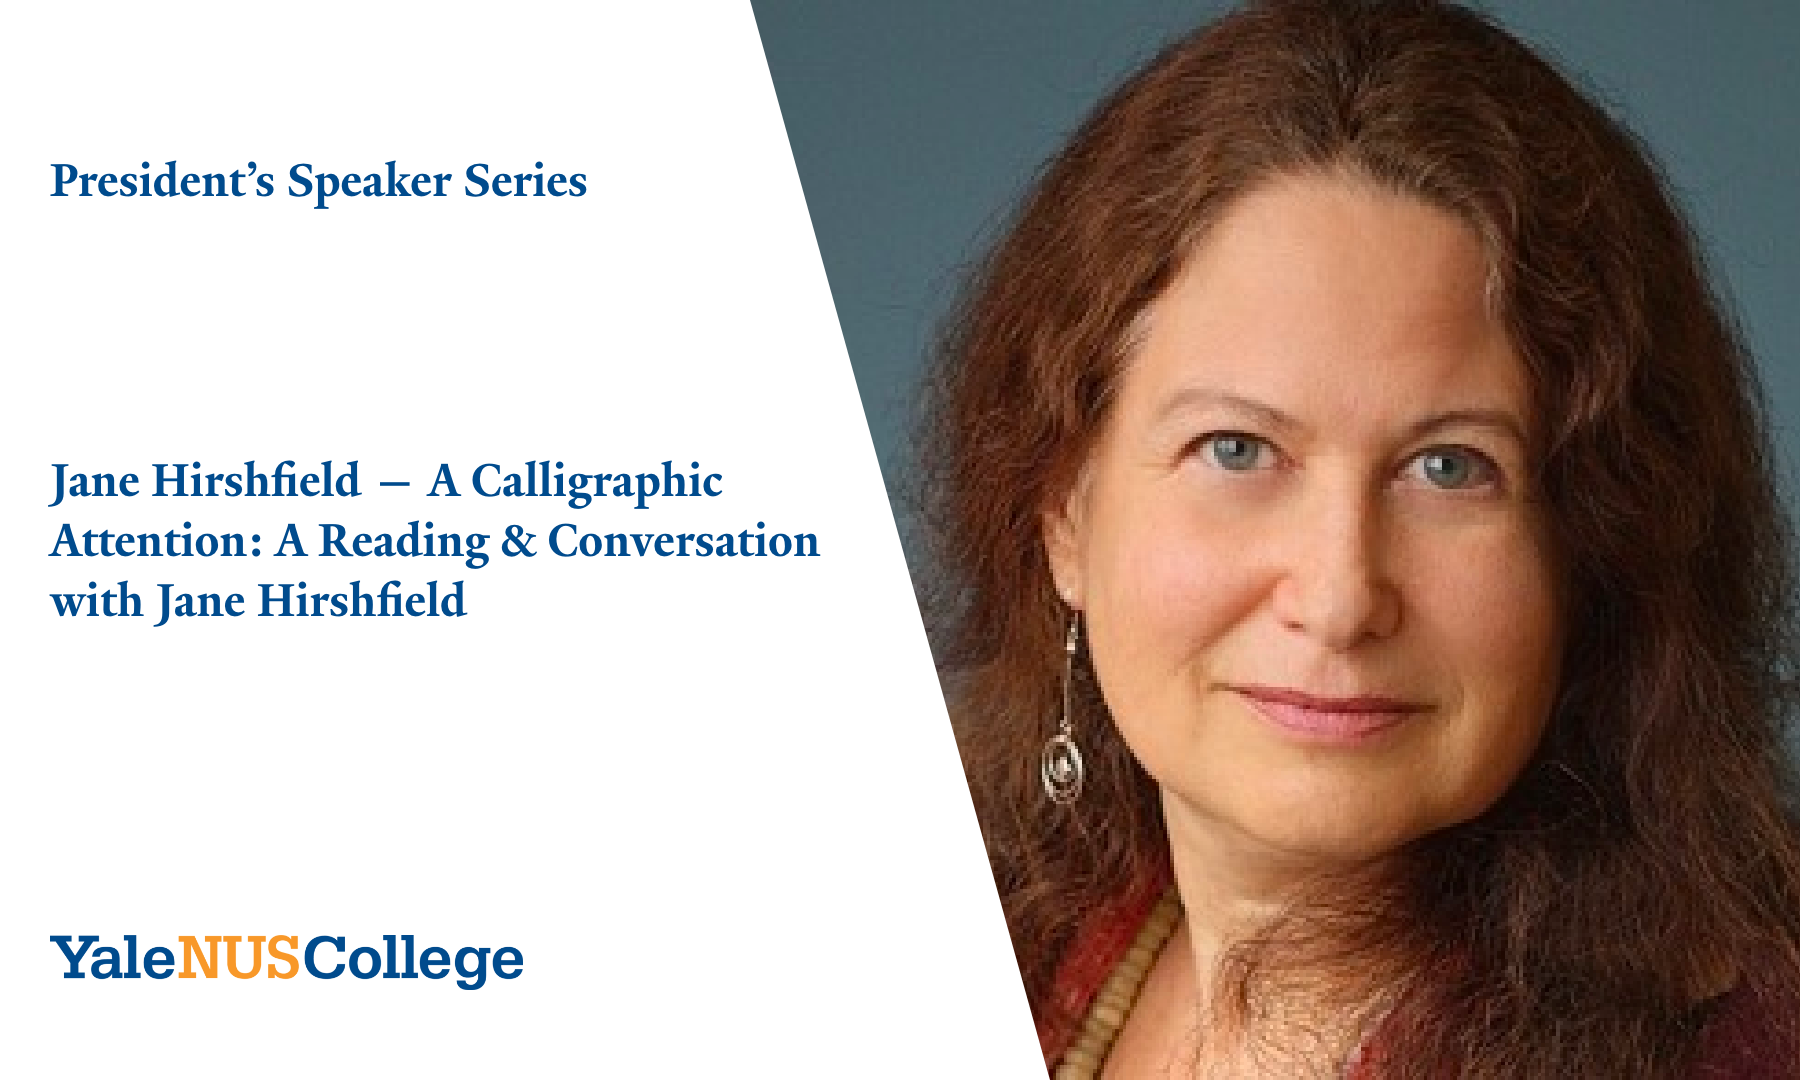 Jane Hirshfield -- A Calligraphic Attention: A Reading & Conversation with Jane Hirshfield